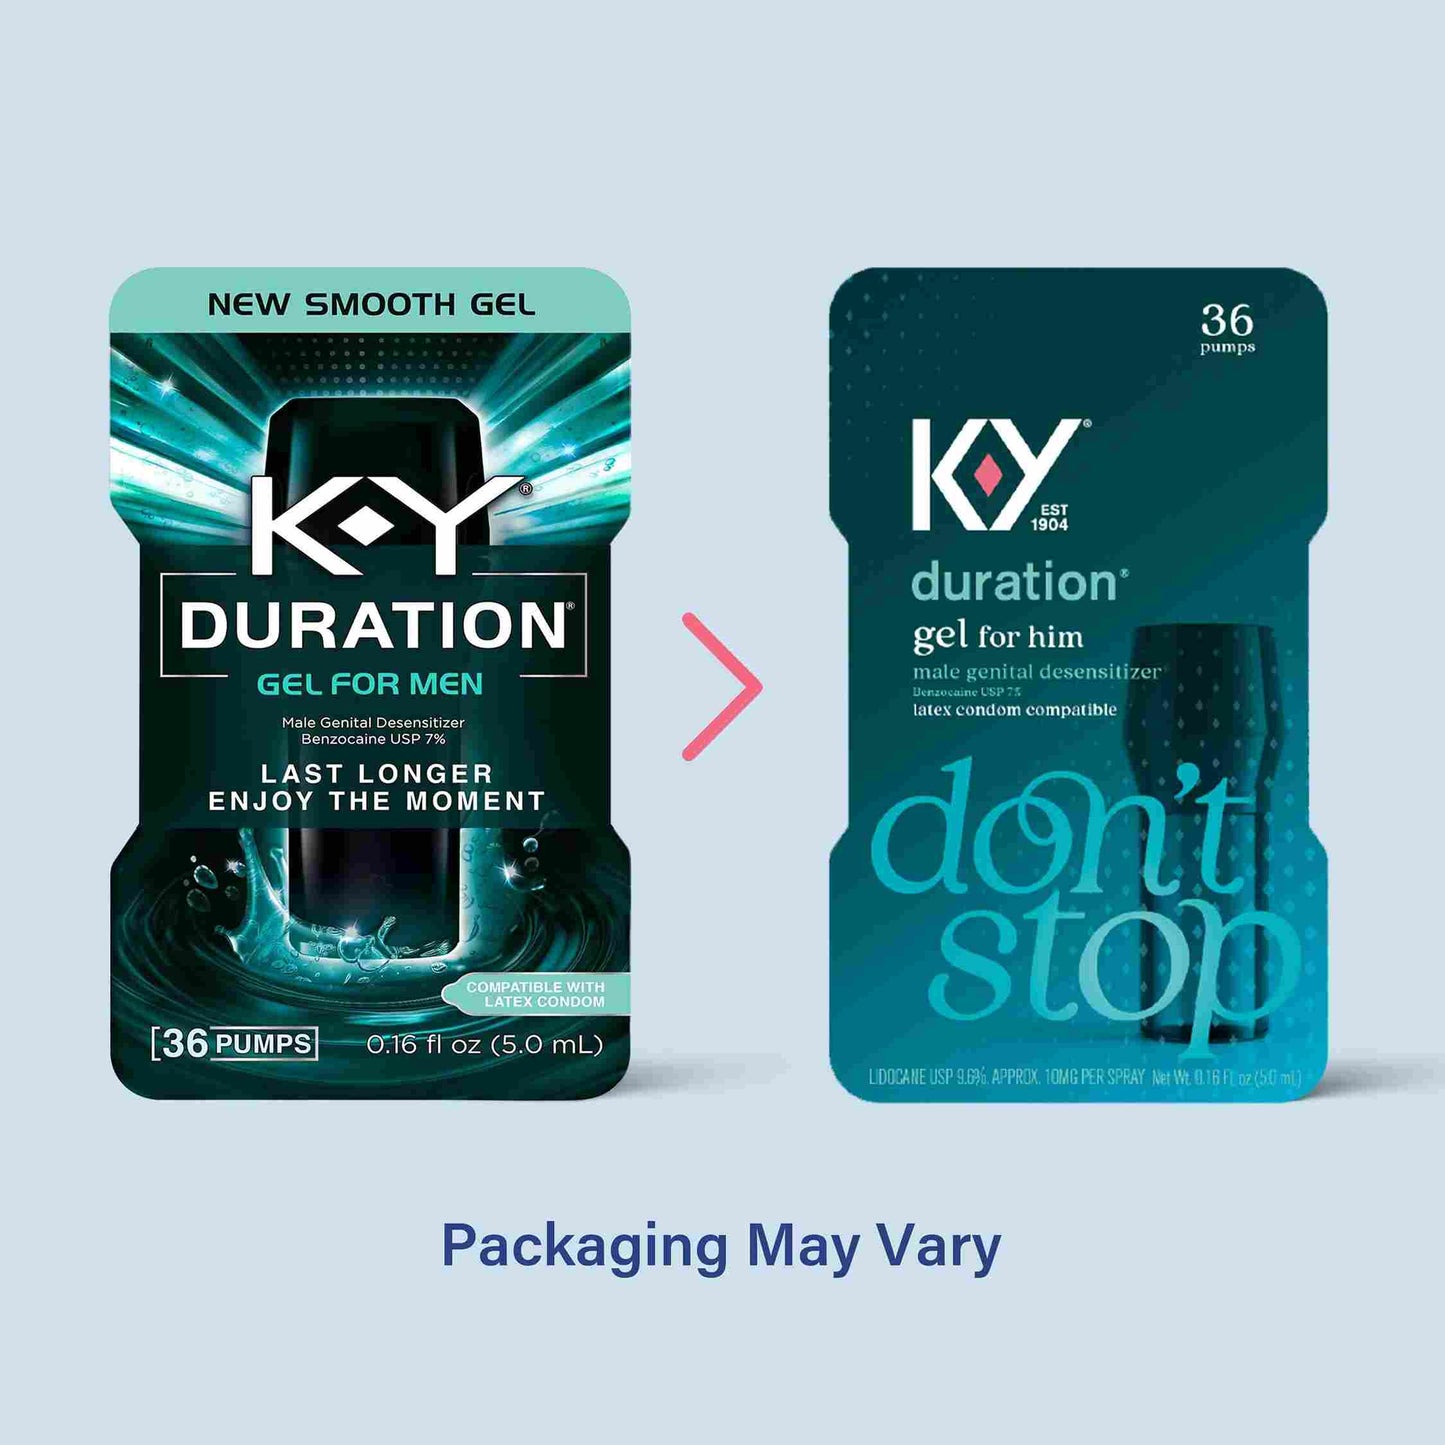 New K-Y Duration packaging